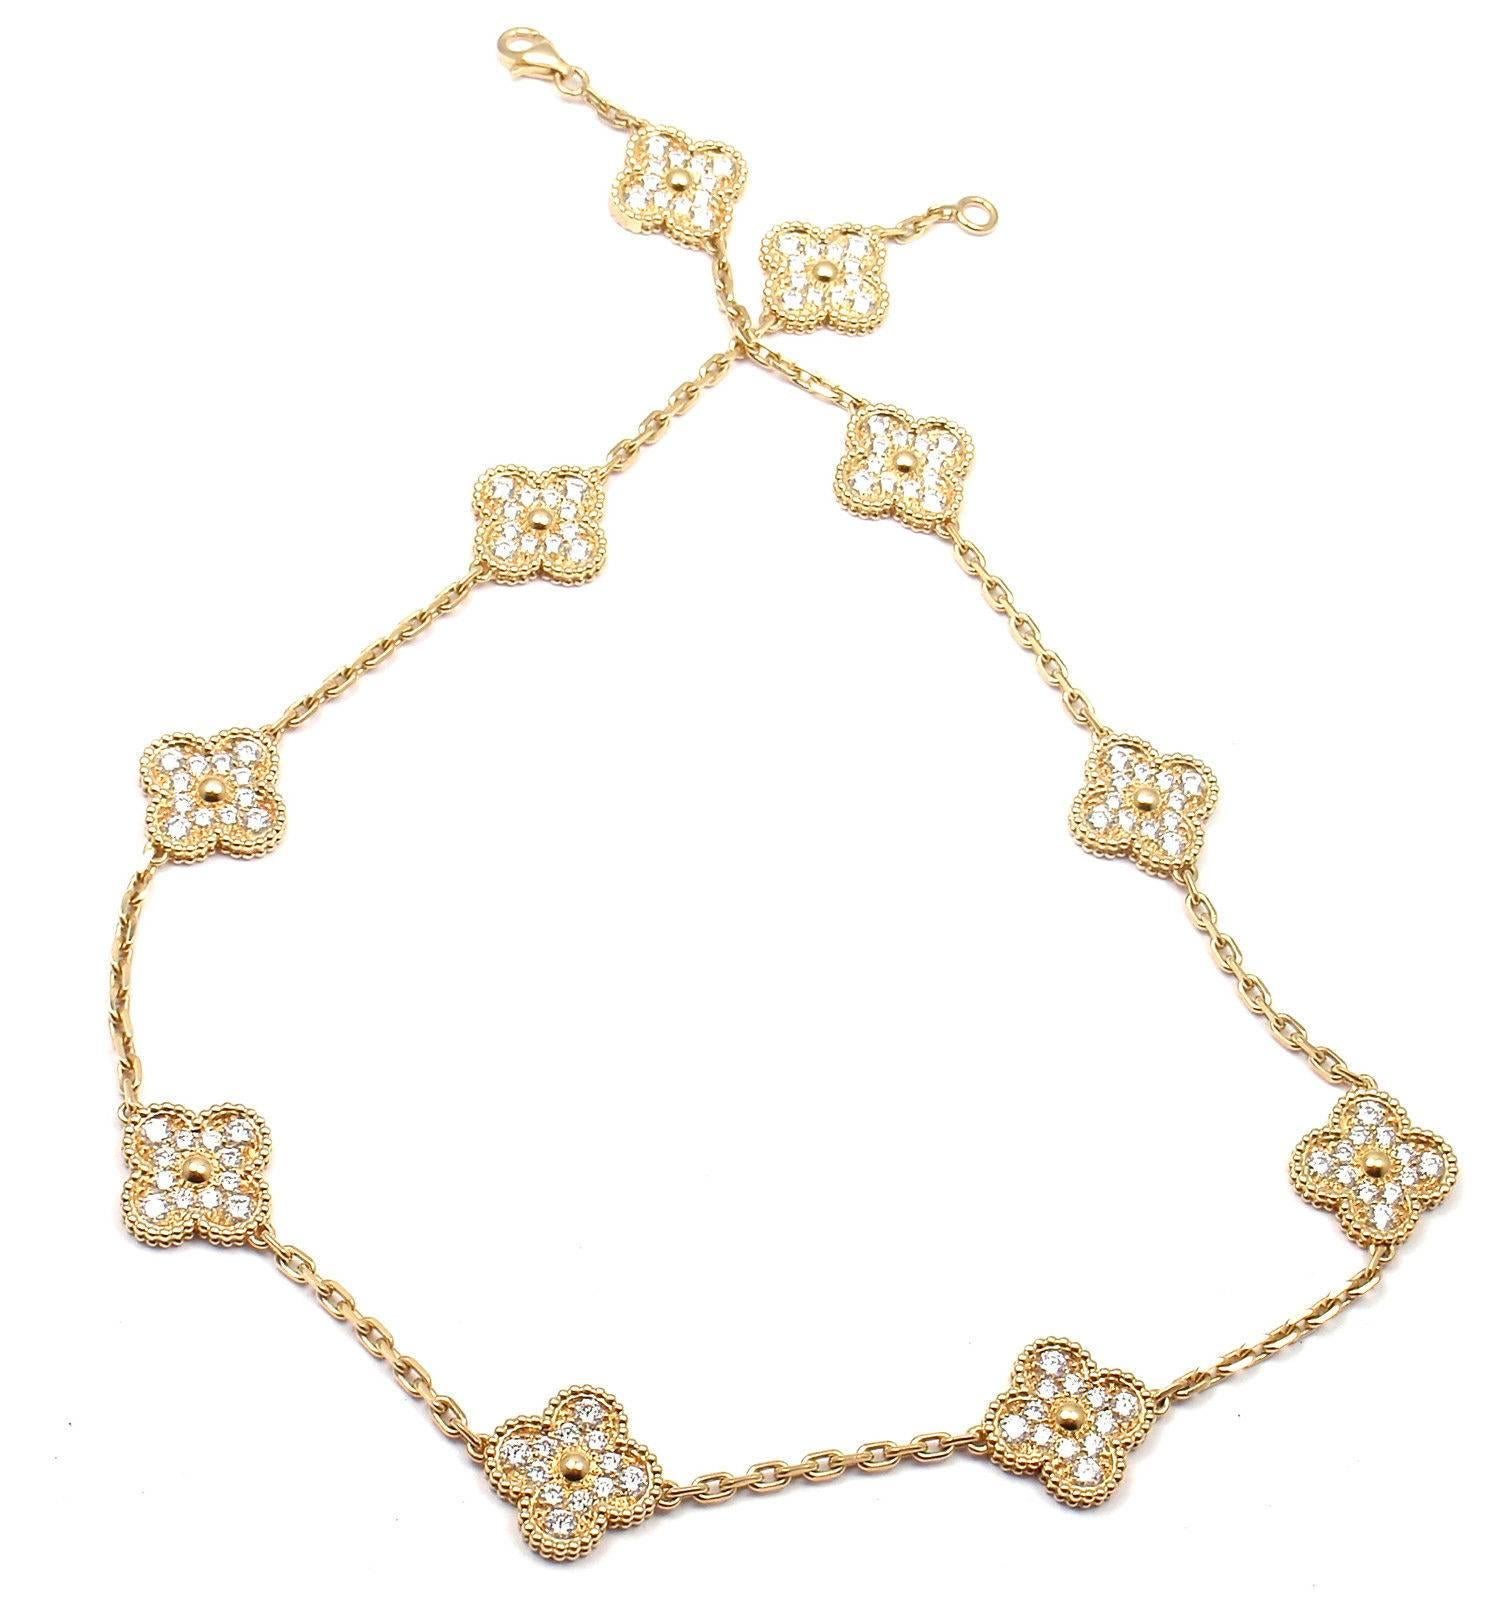 18k Yellow Gold 10 Motif Diamond Vintage Alhambra Necklace by Van Cleef & Arpels. 
With 120 round brilliant cut diamonds VVS1 clarity, E color total weight appprox. 4.83ct 
This necklace comes with a certificate from Van Cleef & Arpels.
Details: